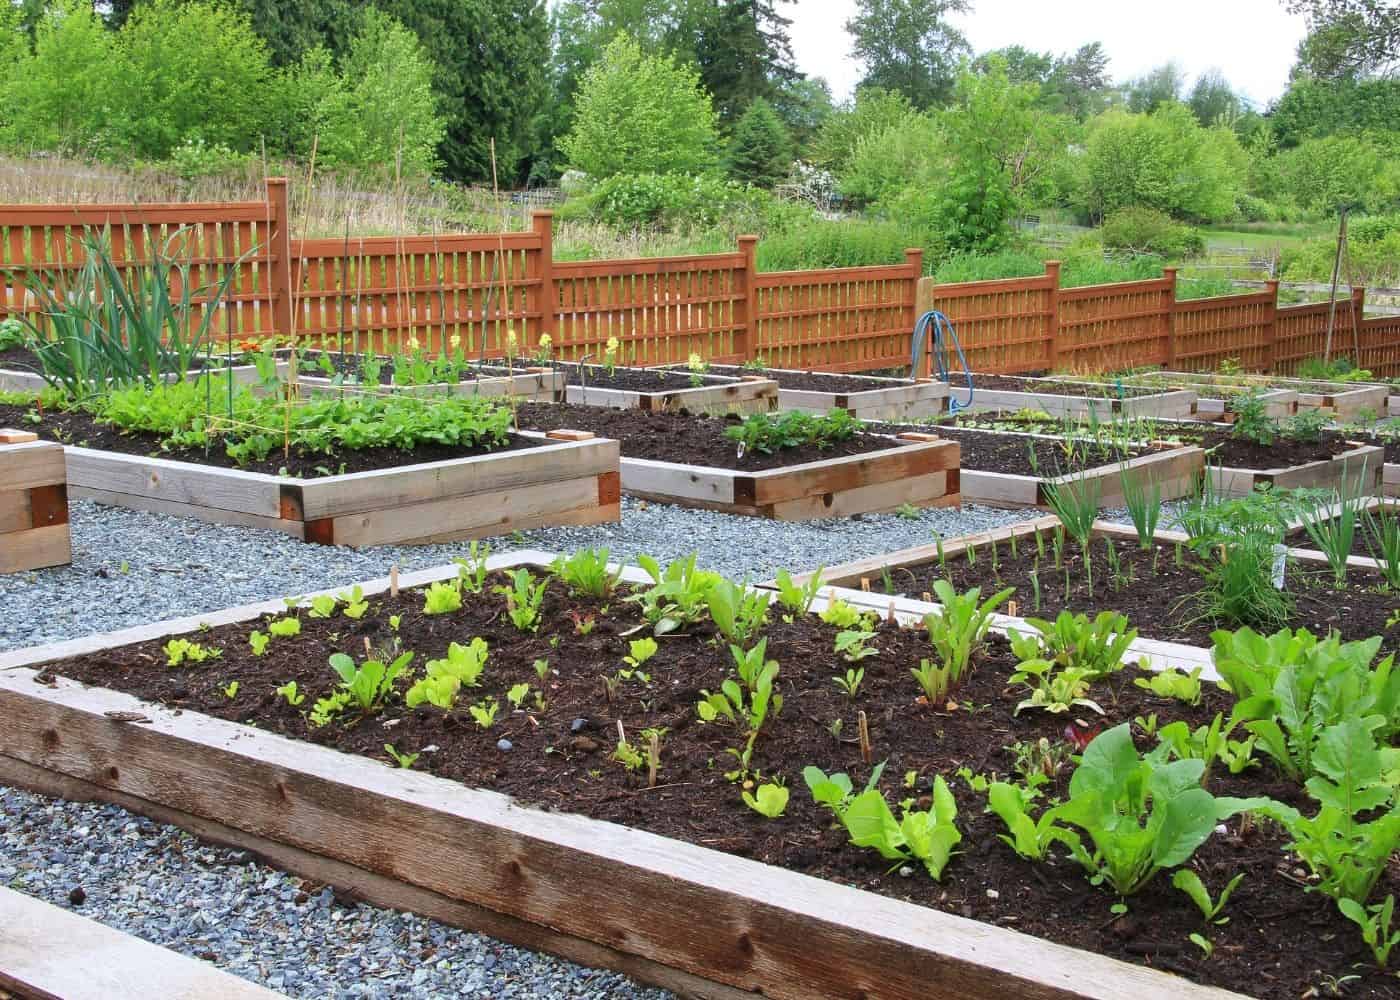 Potager Garden with Raised Beds on Slope